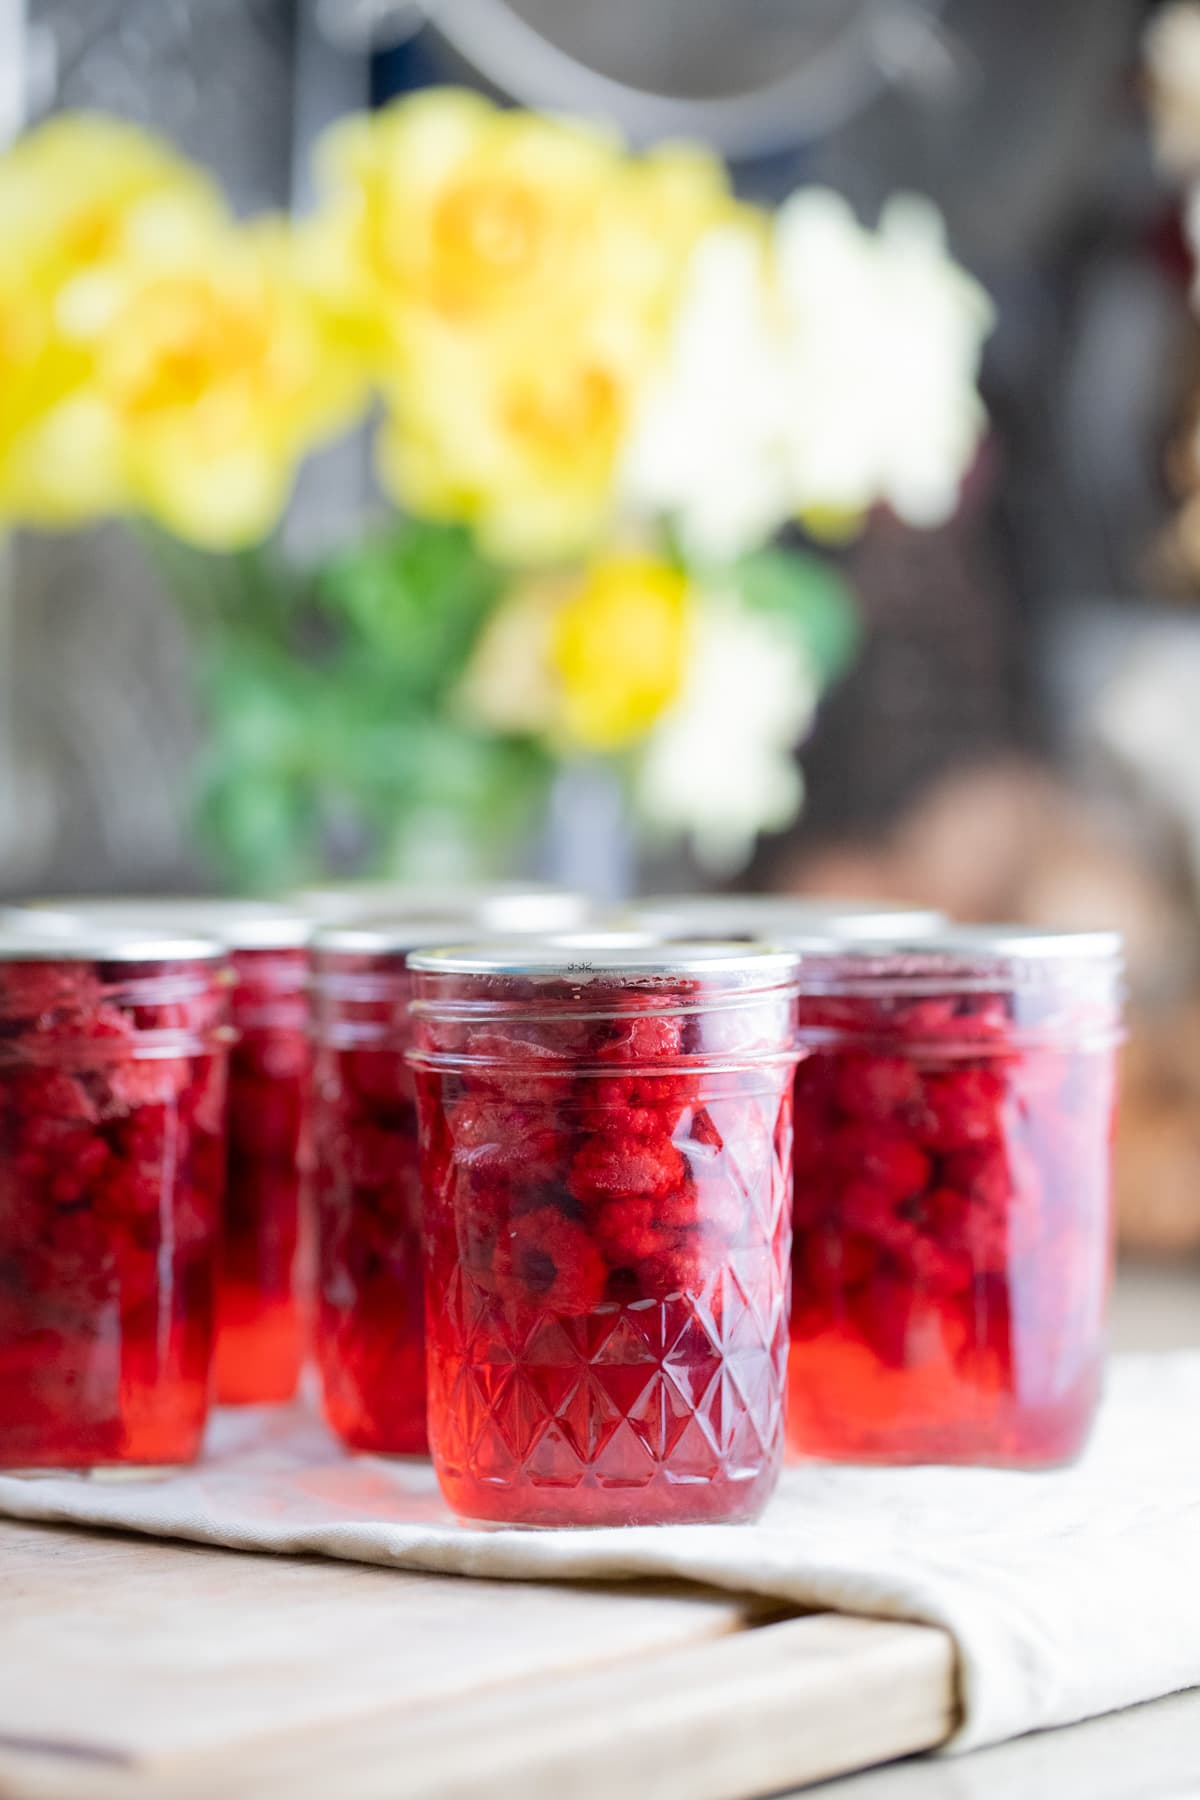 canning raspberries at home